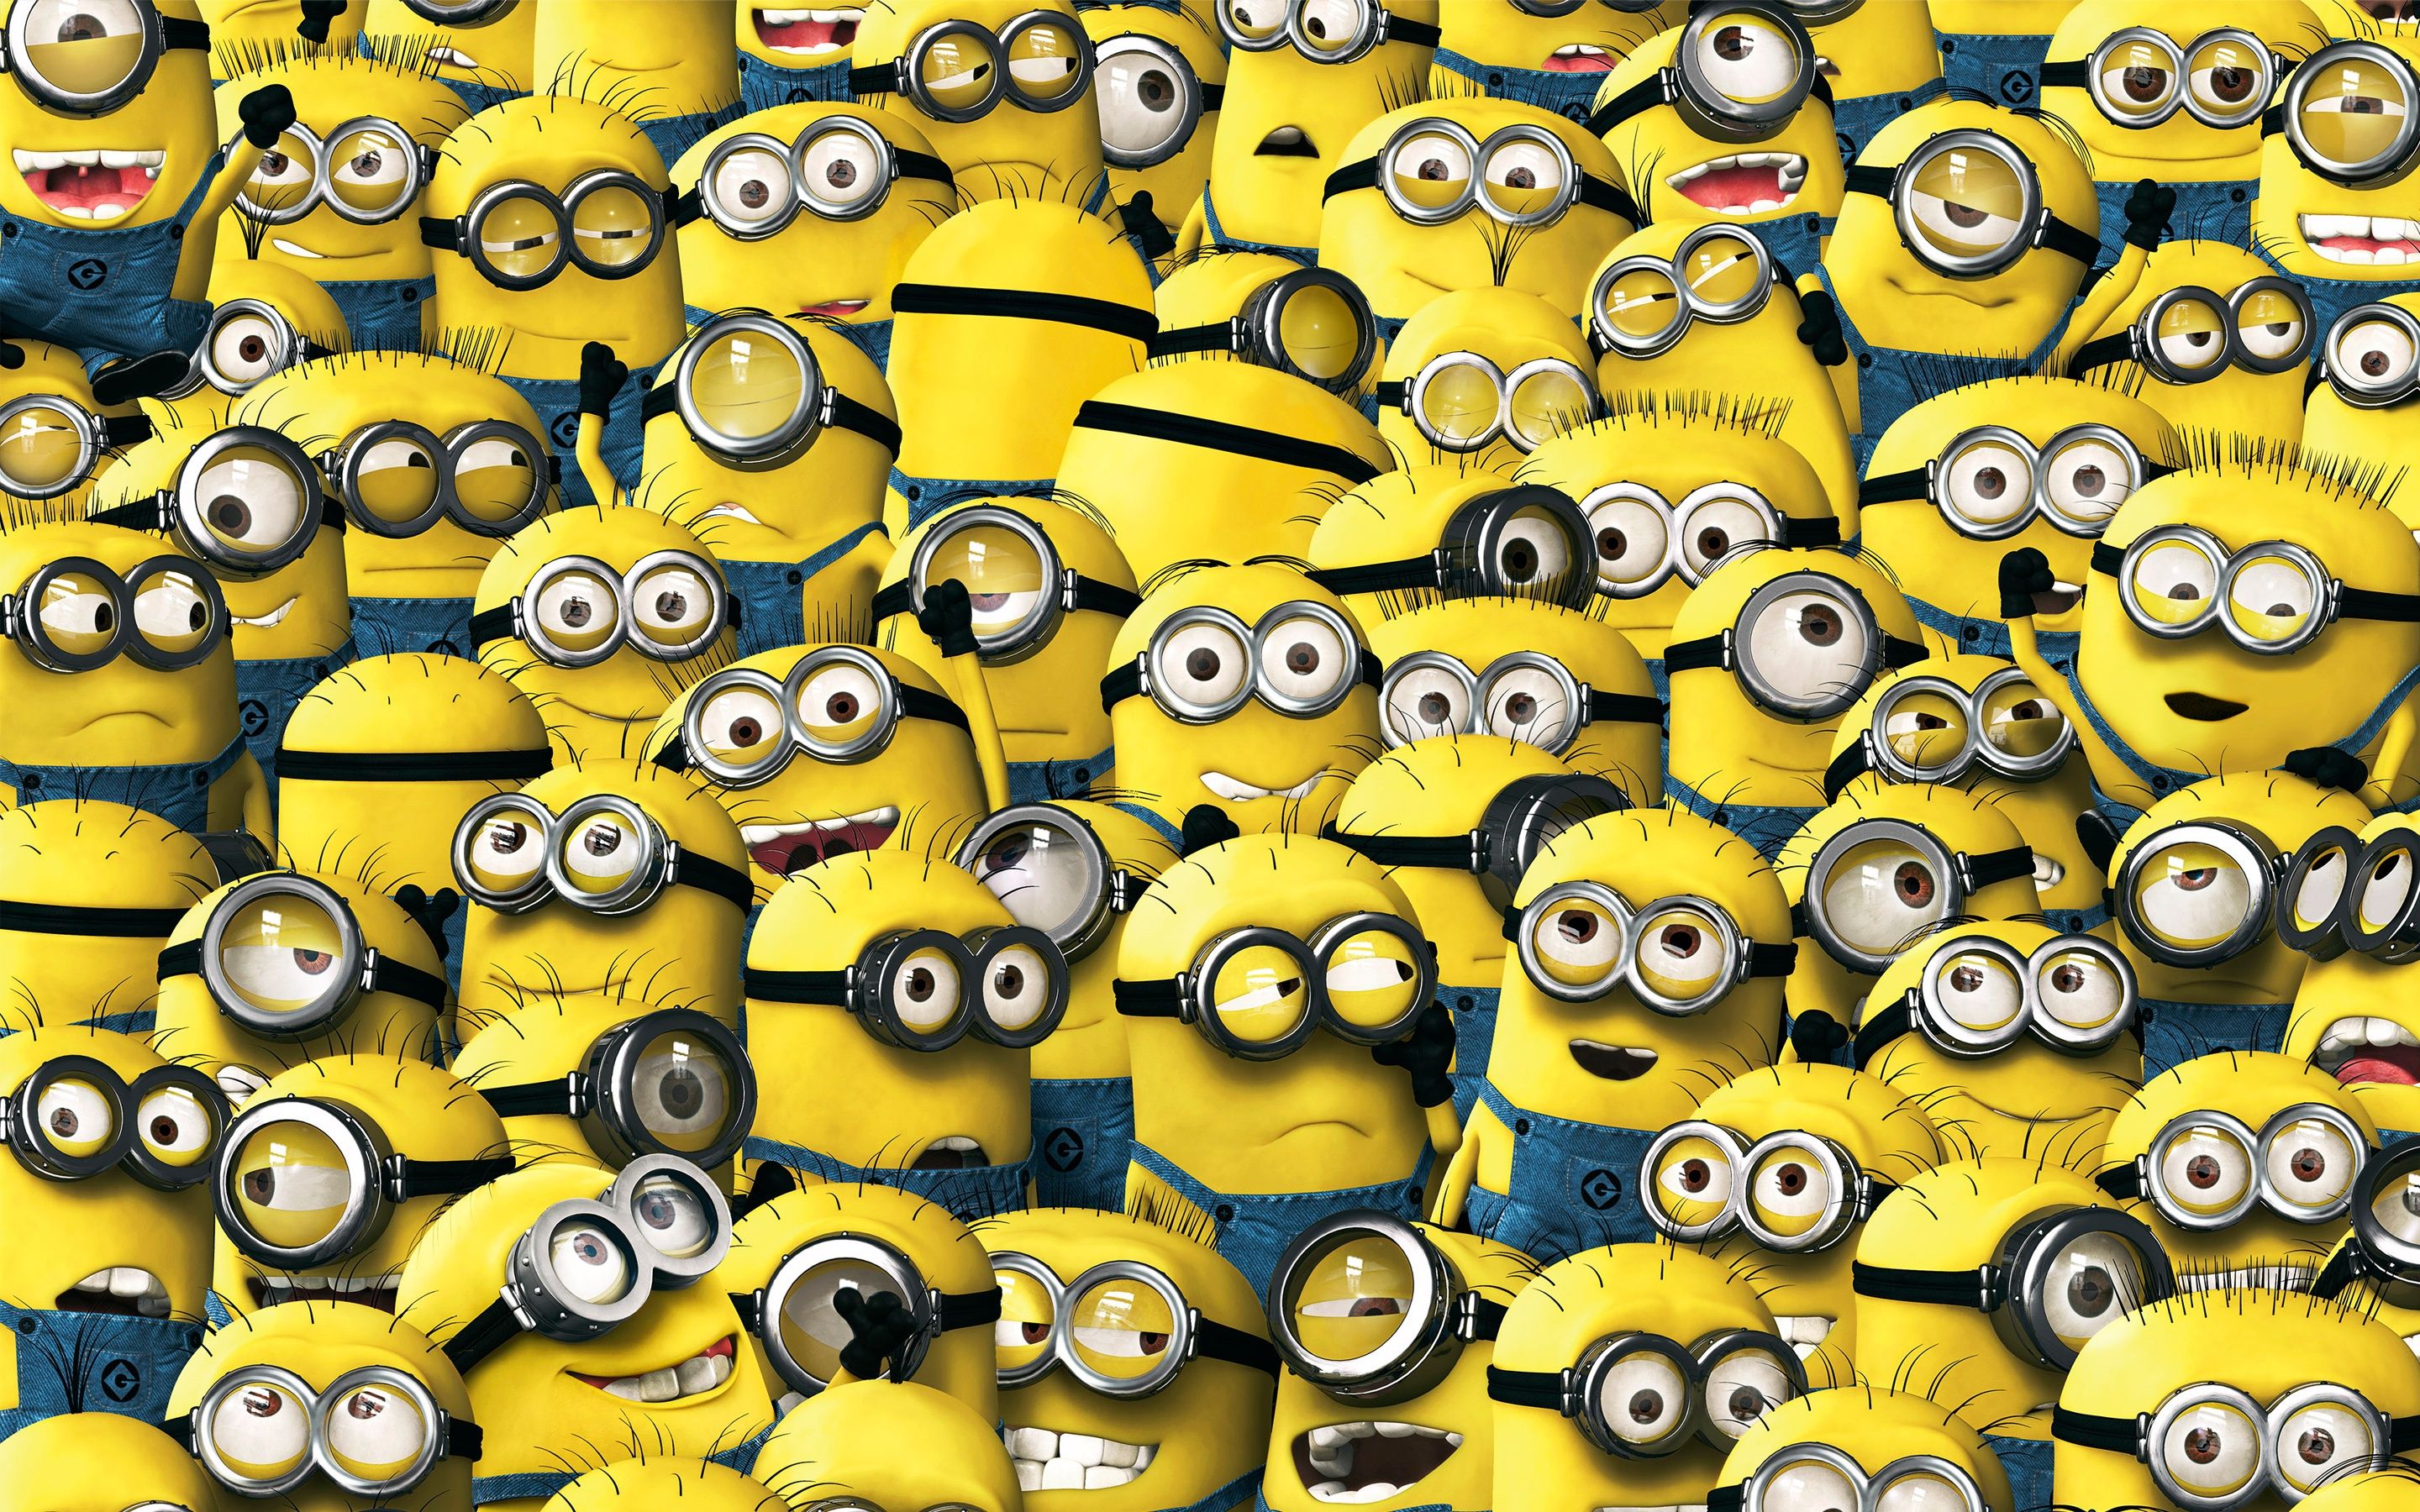 Minions - Despicable Me 2 Wallpaper Ideas 2913 Hd Wallpapers